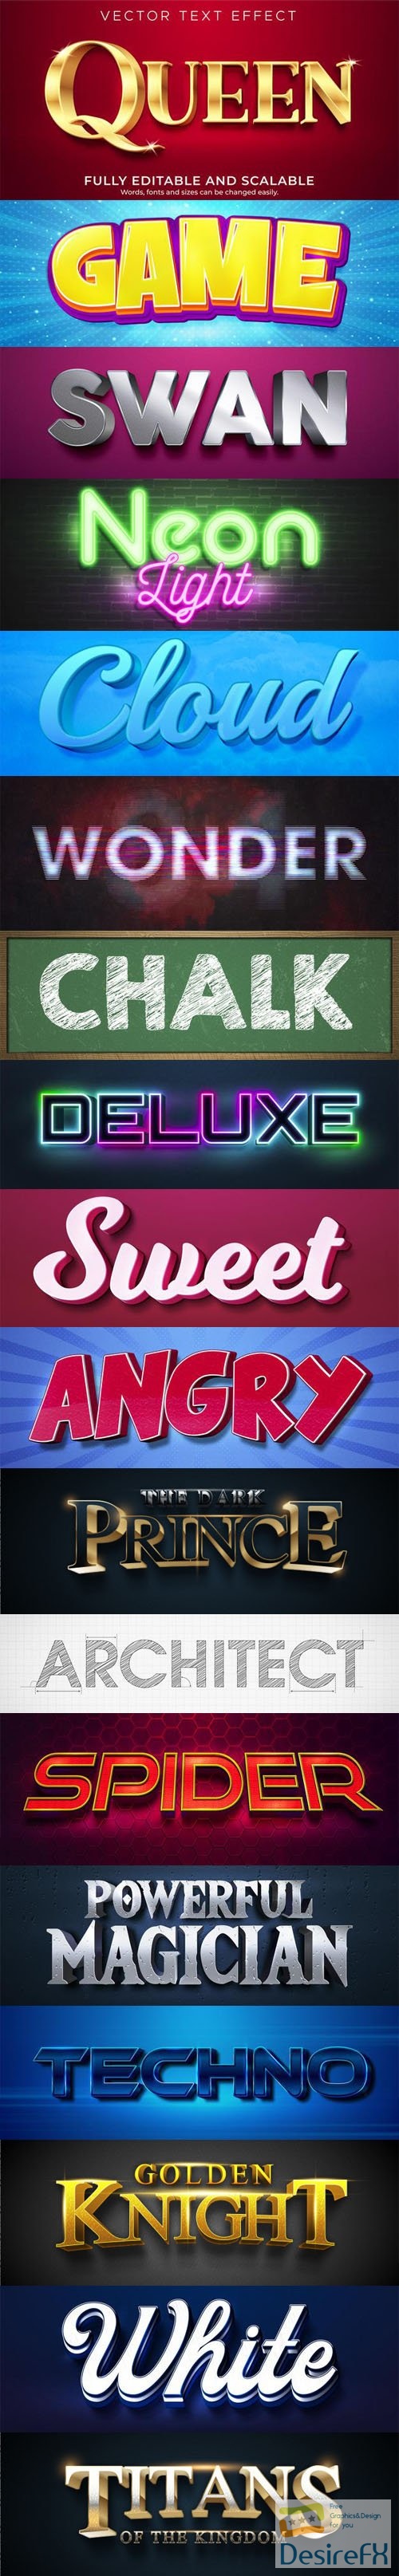 18 Text Effect Vector Templates - Text Styles Collection